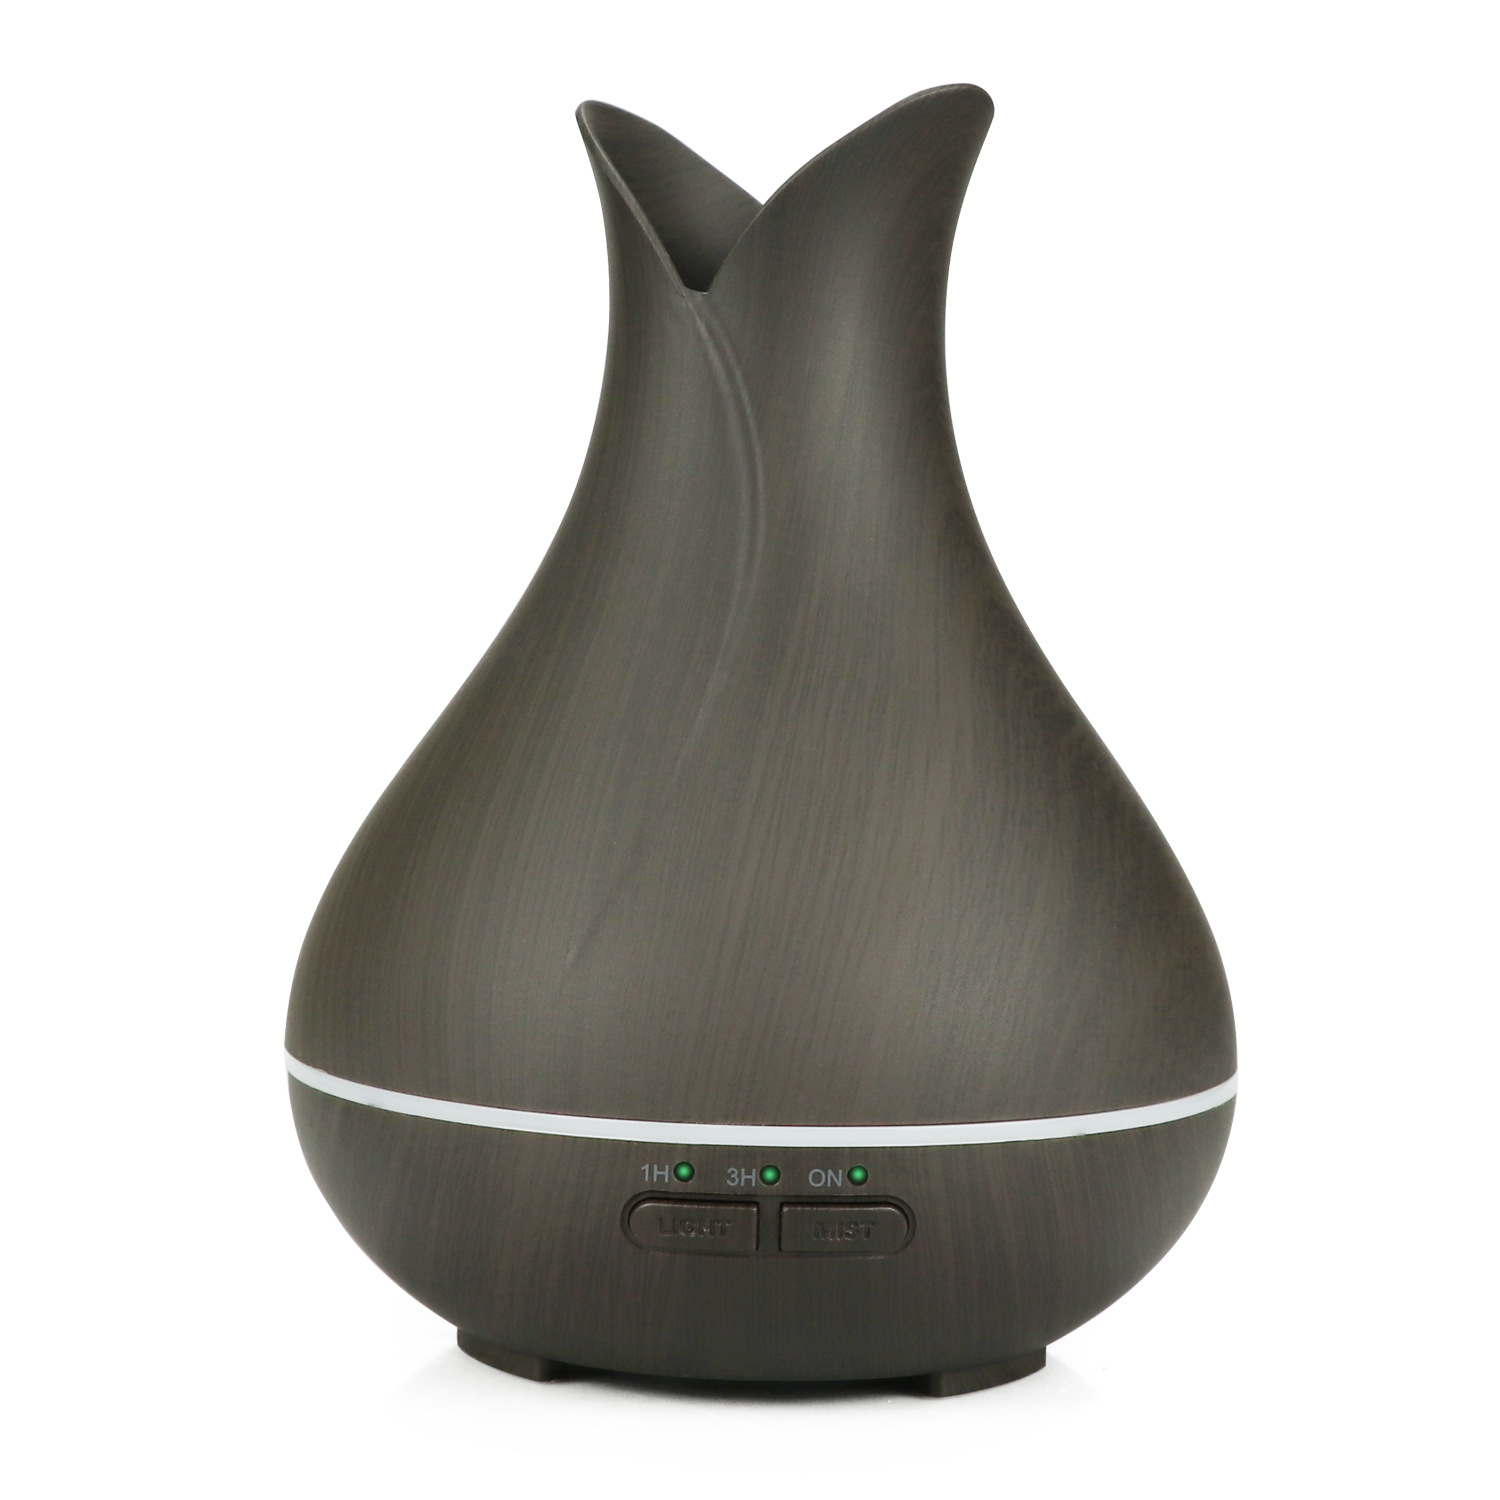 factory Outlets for China Mini Ultrasonic Humidifier LED Light Aroma Diffuser Household Essential Oil Diffuseur